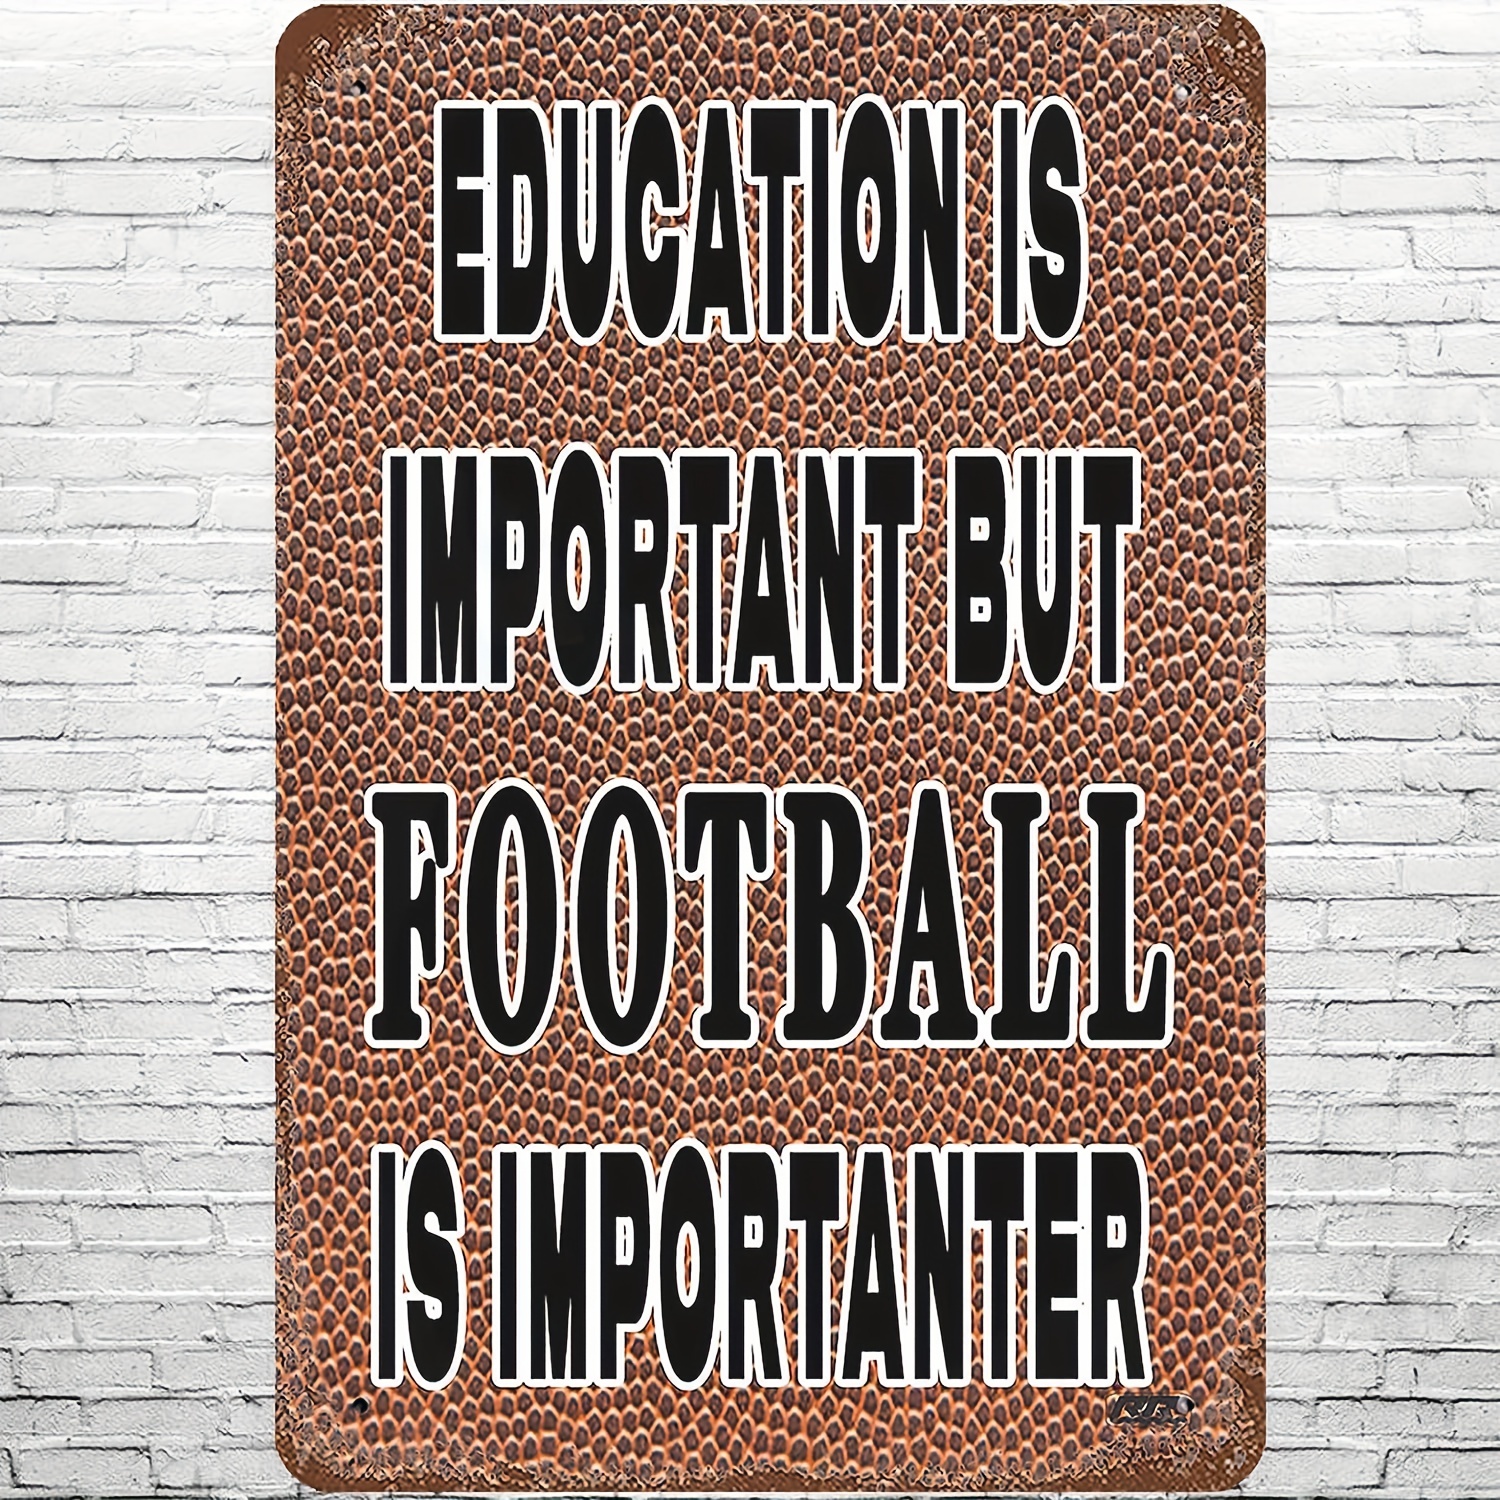 poster on education is important